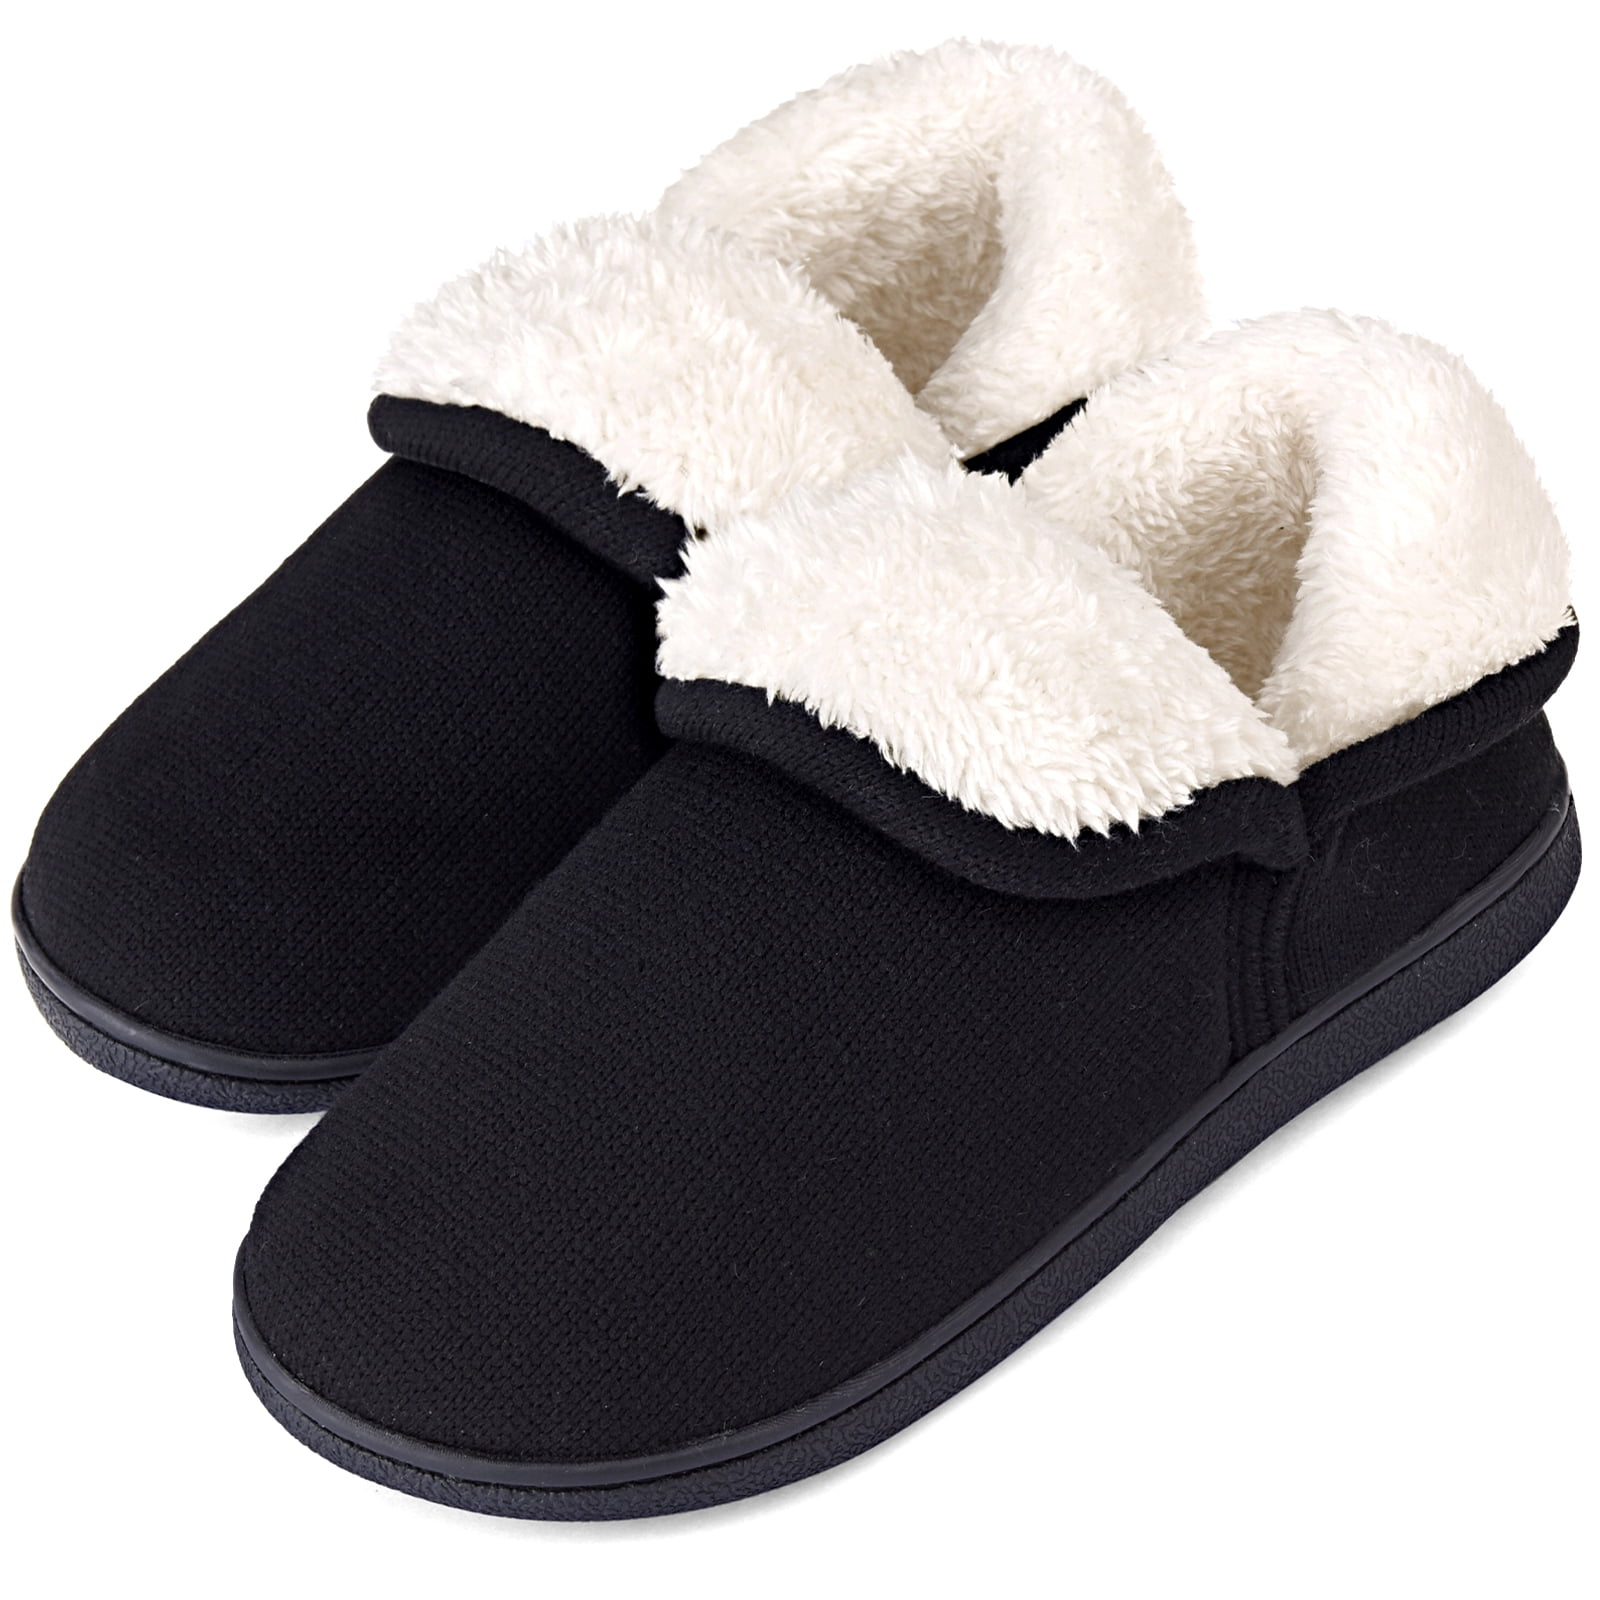 VONMAY Women's Two-Tone Slippers Slip On Memory Foam Comfy House Shoes Lightweight Indoor Outdoor 